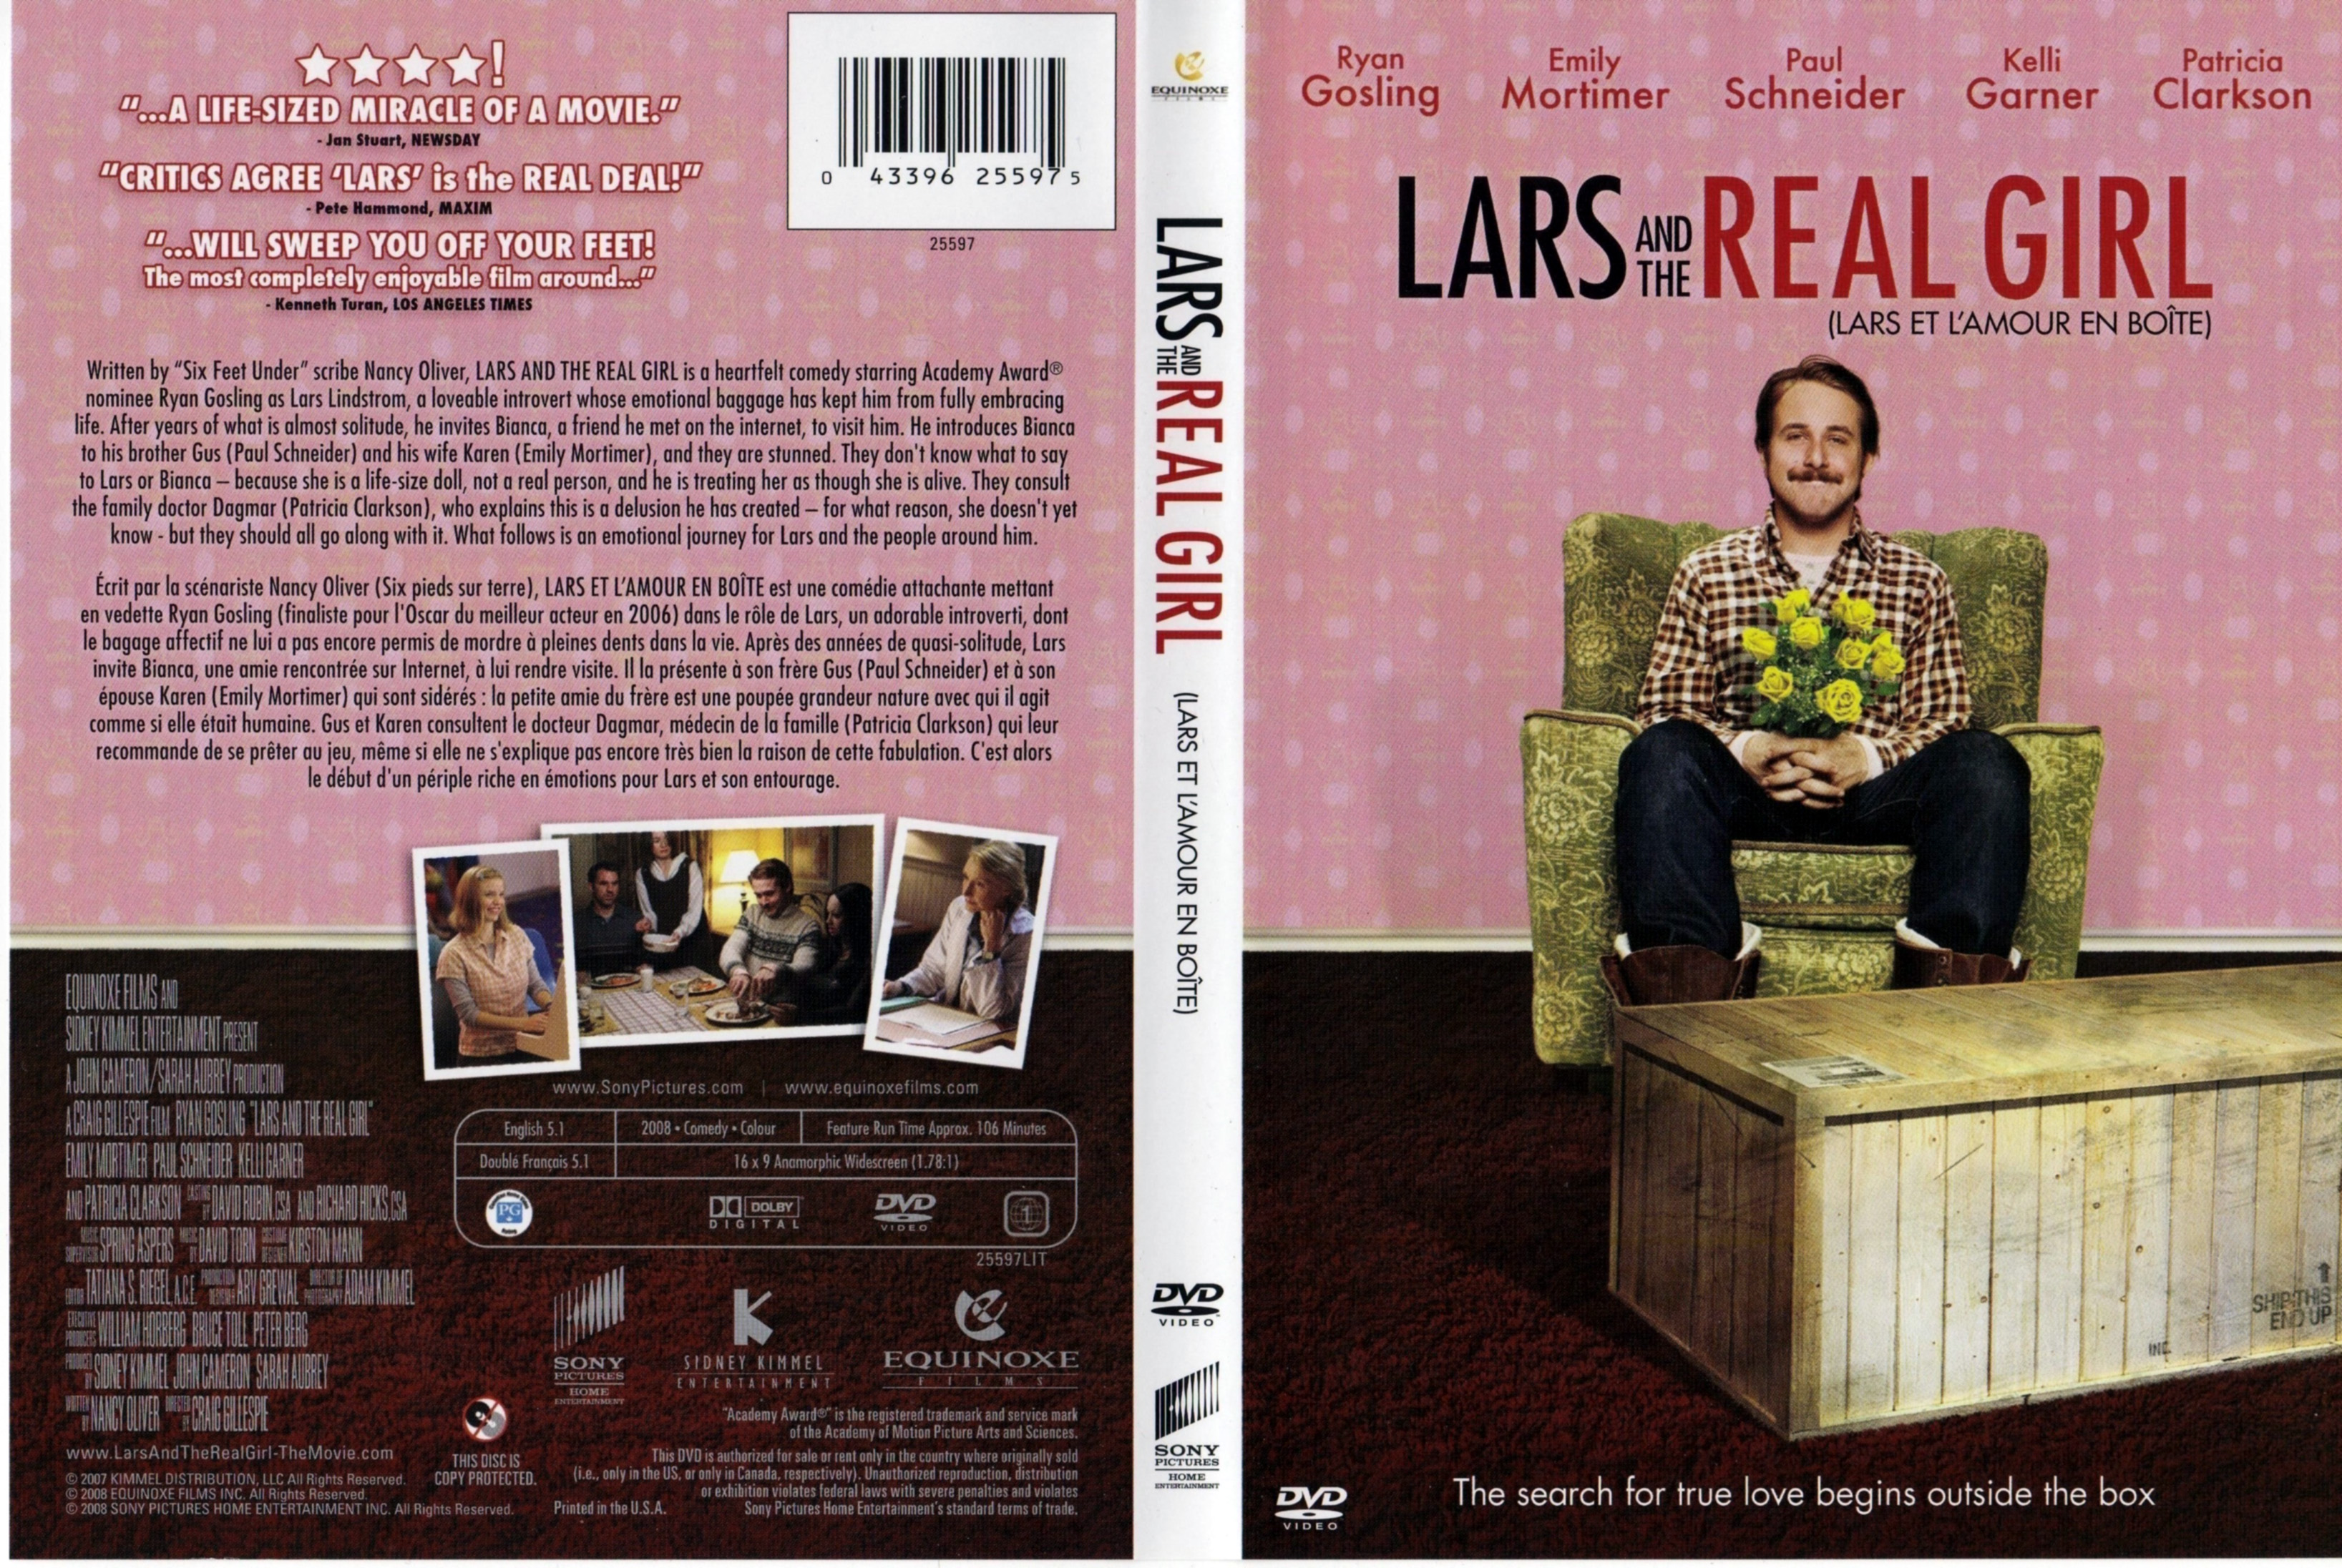 Jaquette DVD Lars And The Real Girl - Lars et l